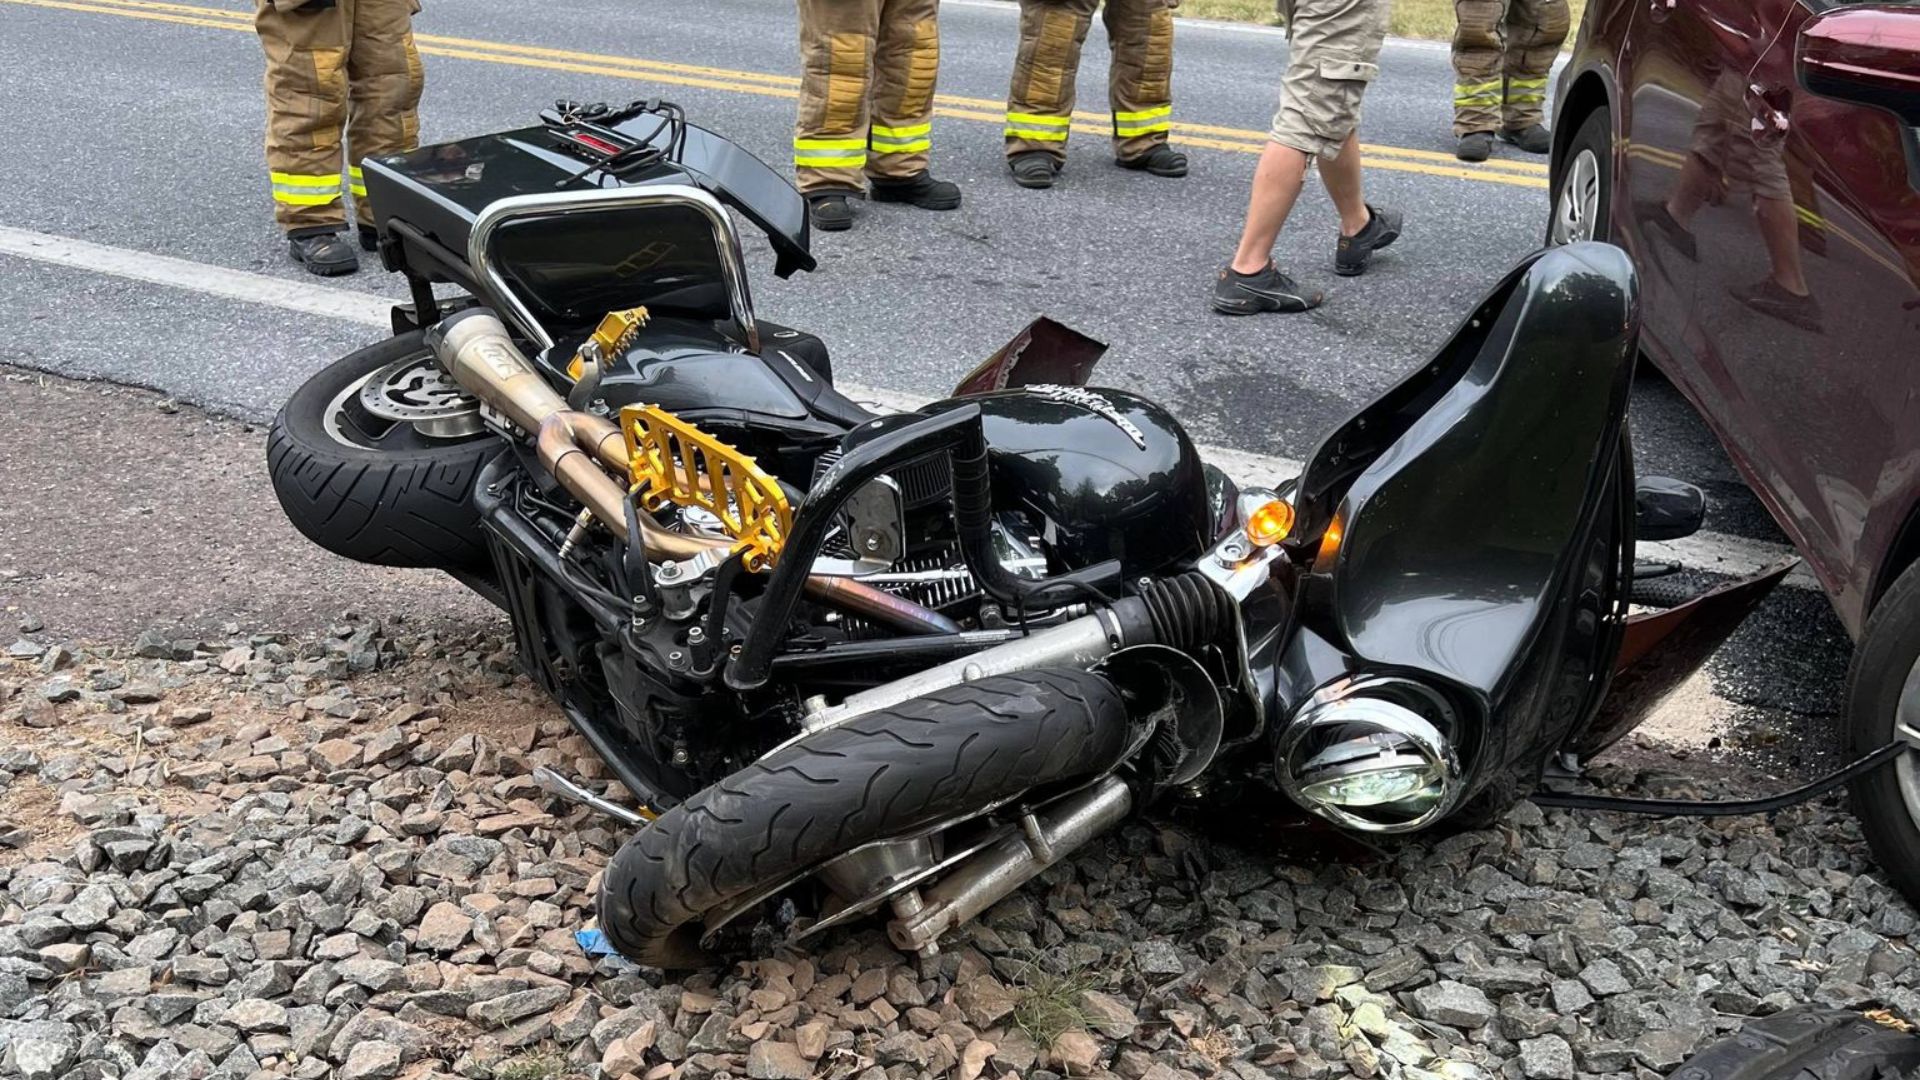 https://carandbike24.com/tips-for-choosing-motorcycle-accident-attorney/